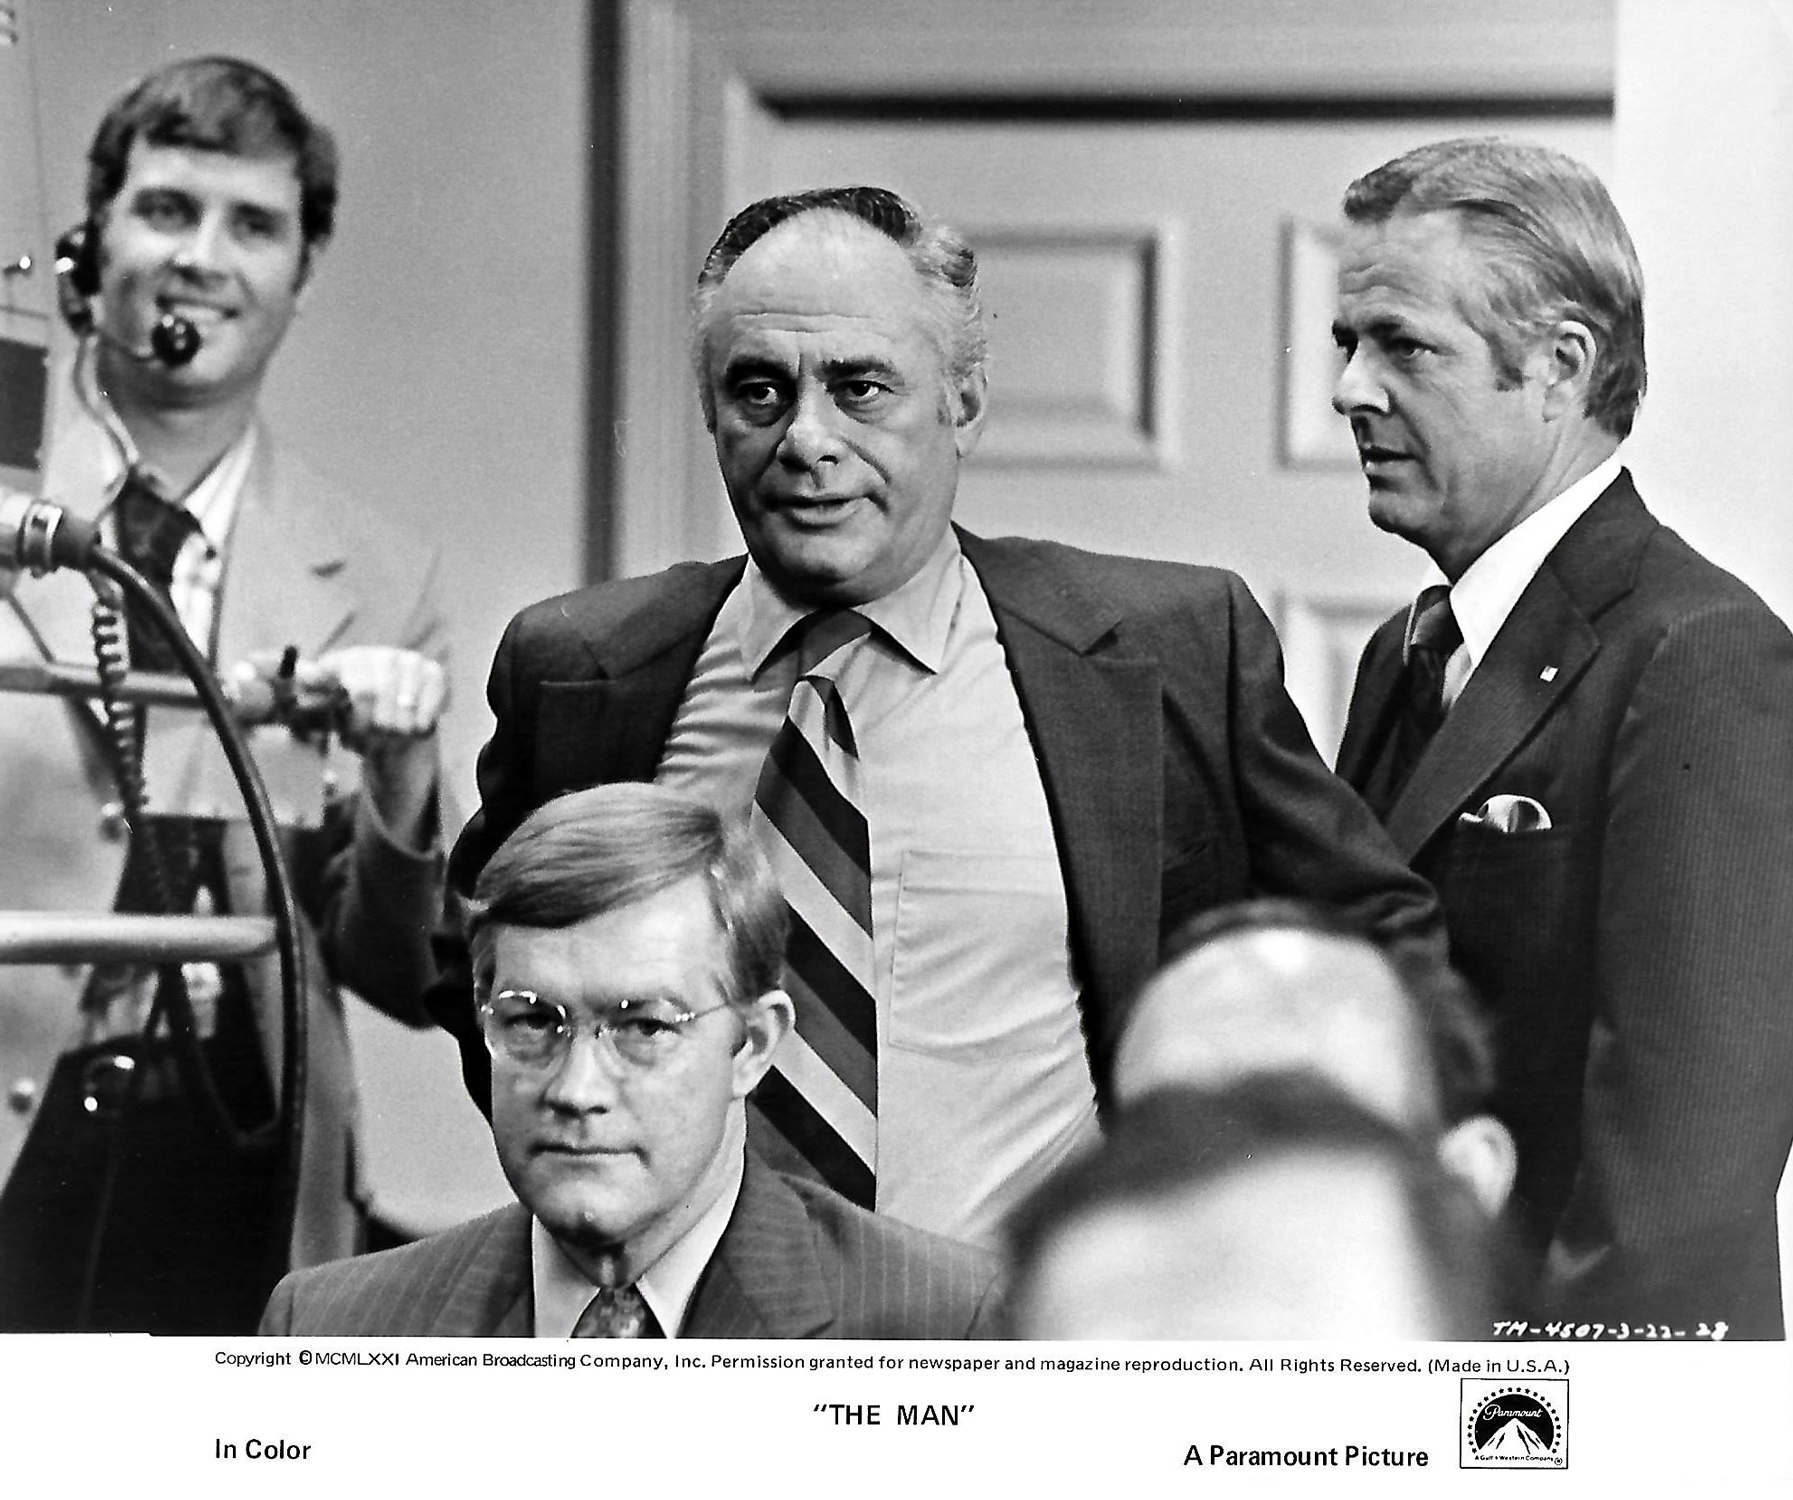  Martin Balsam (center), as “Jim Talley”, and William Windom (right), as “Arthur Eaton” 